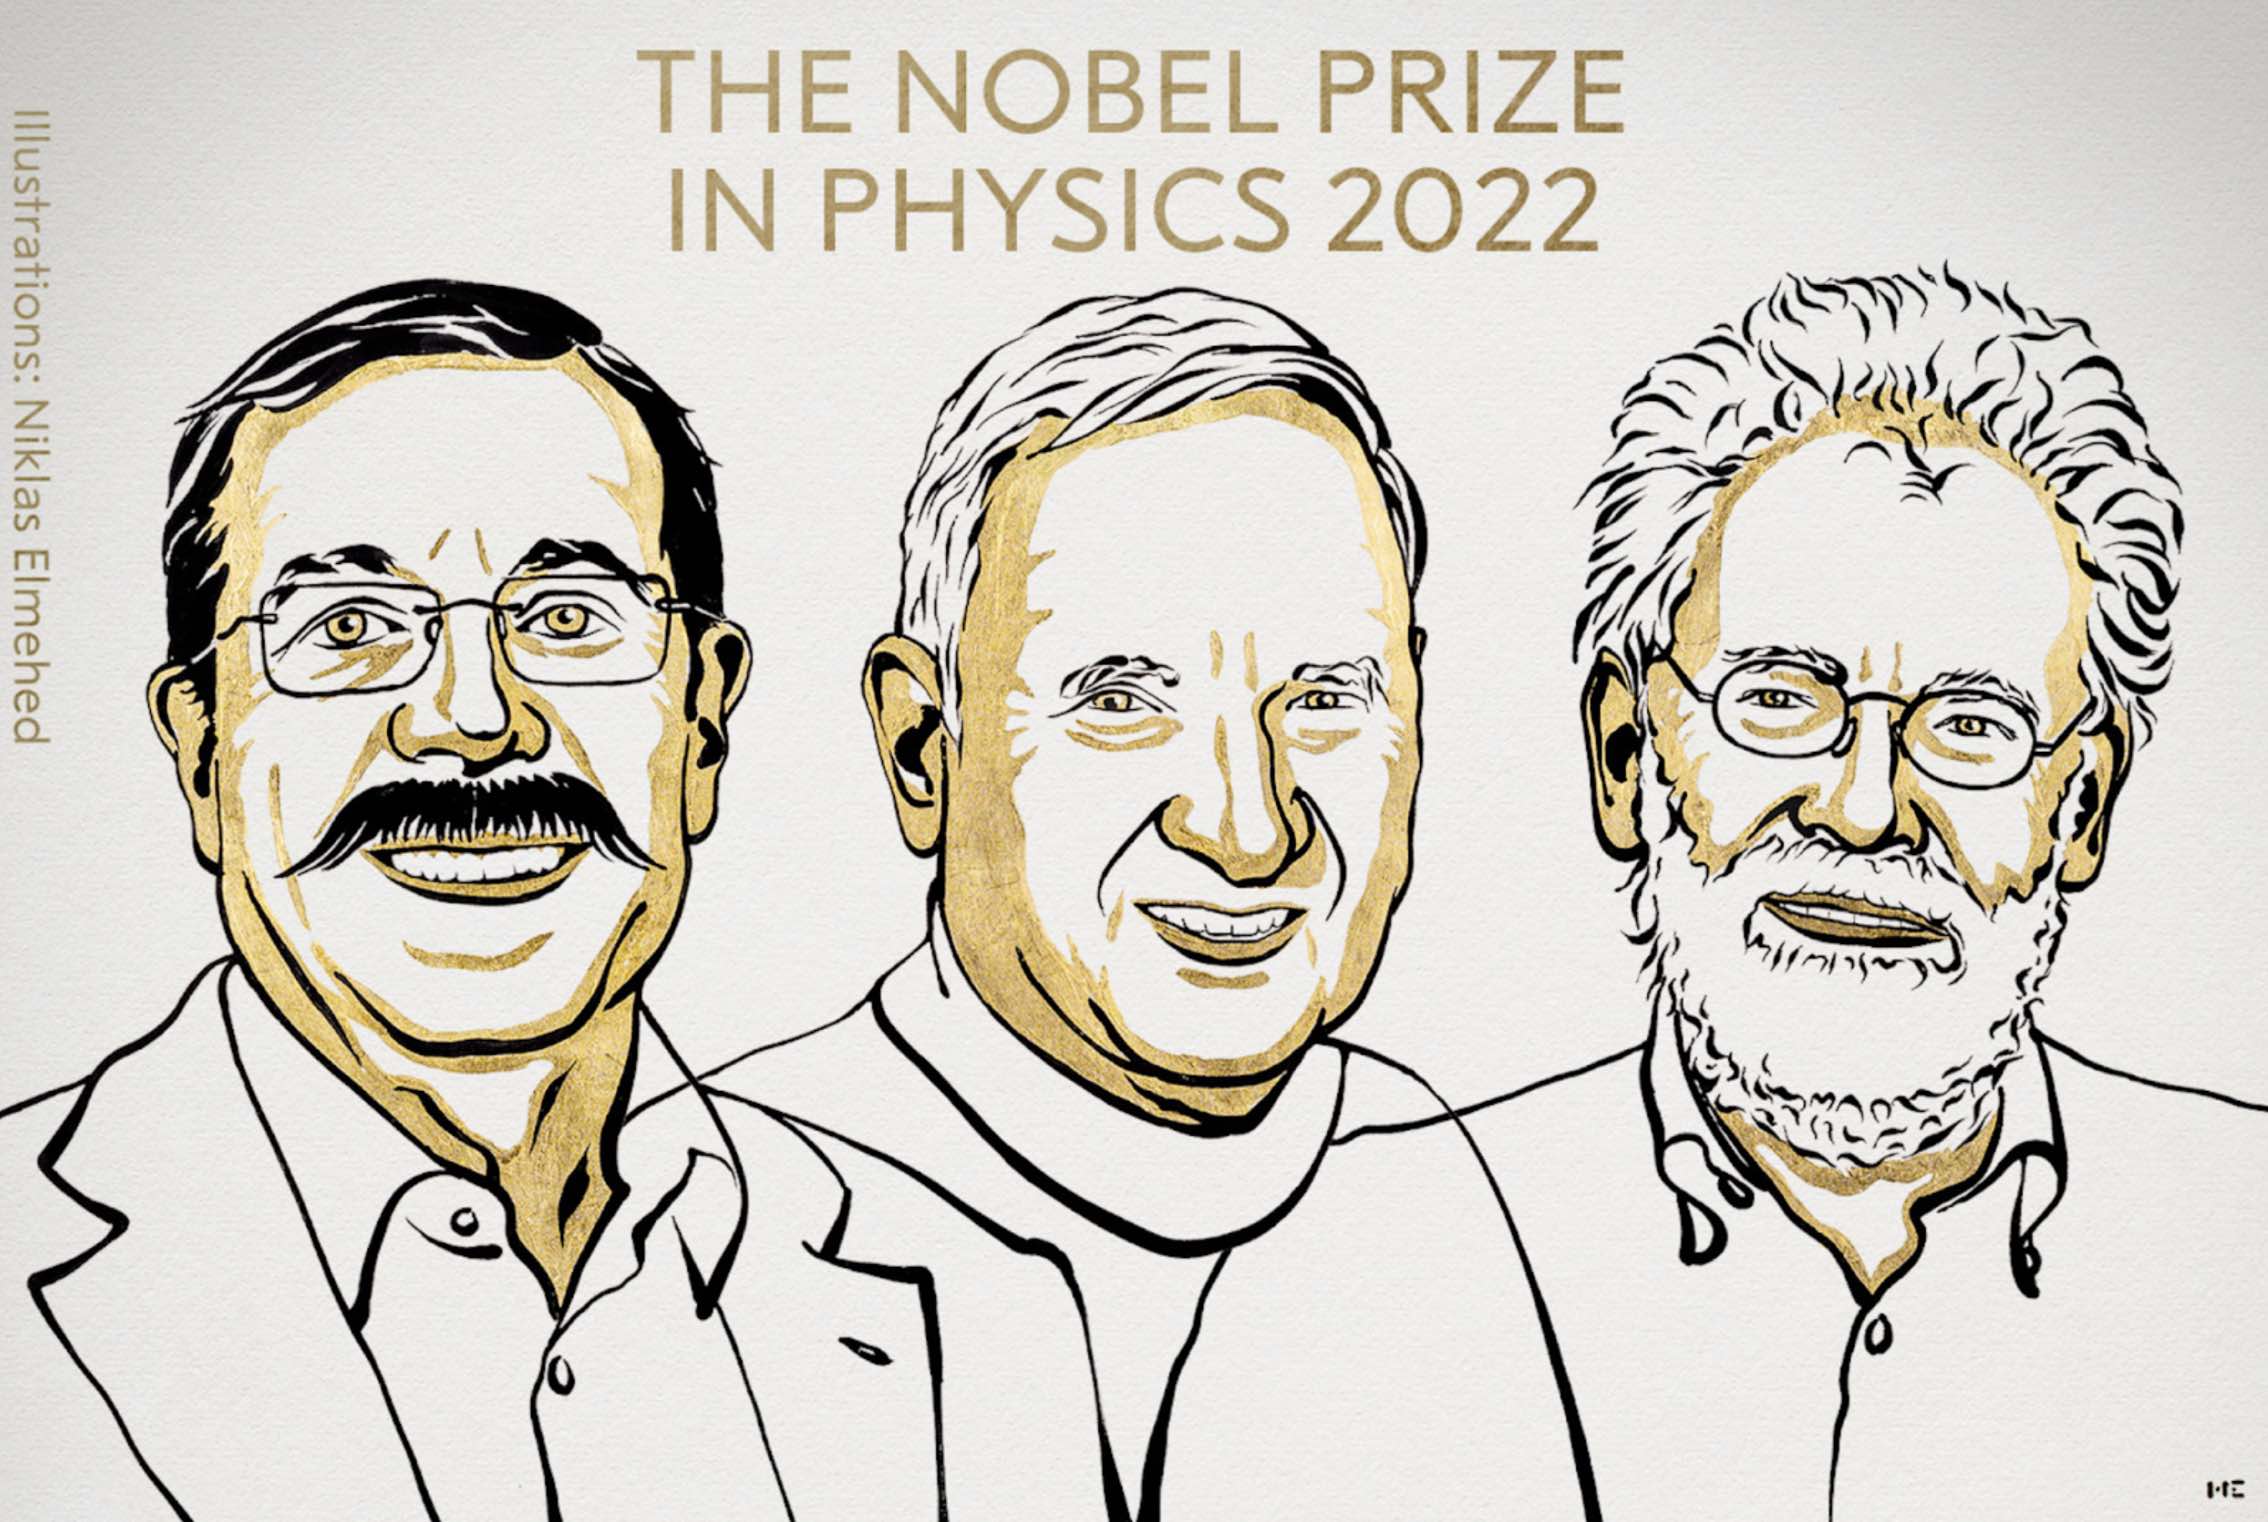 Illustrations of Alain Aspect, John F. Clauser and Anton Zeilinger, under the words "The Nobel Prize in Physics 2022."